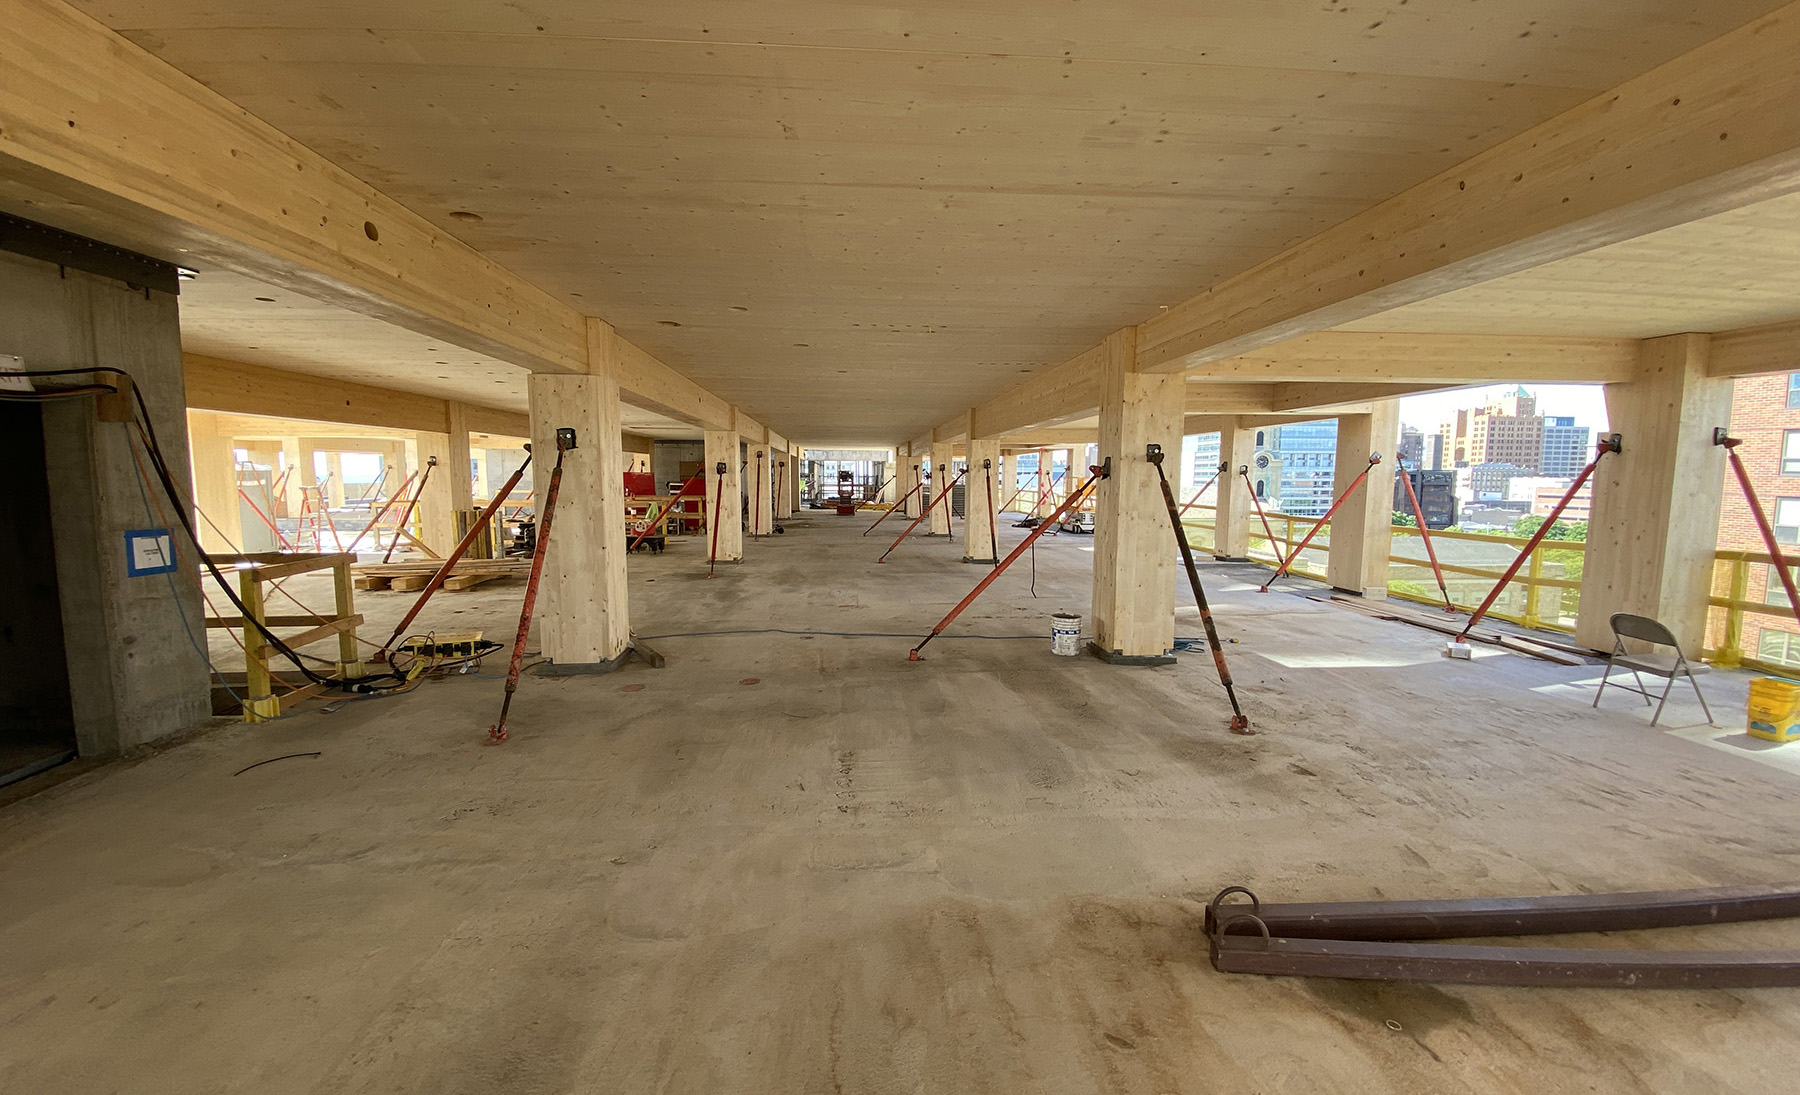 Photograph shows the wood beams and floor framing. 